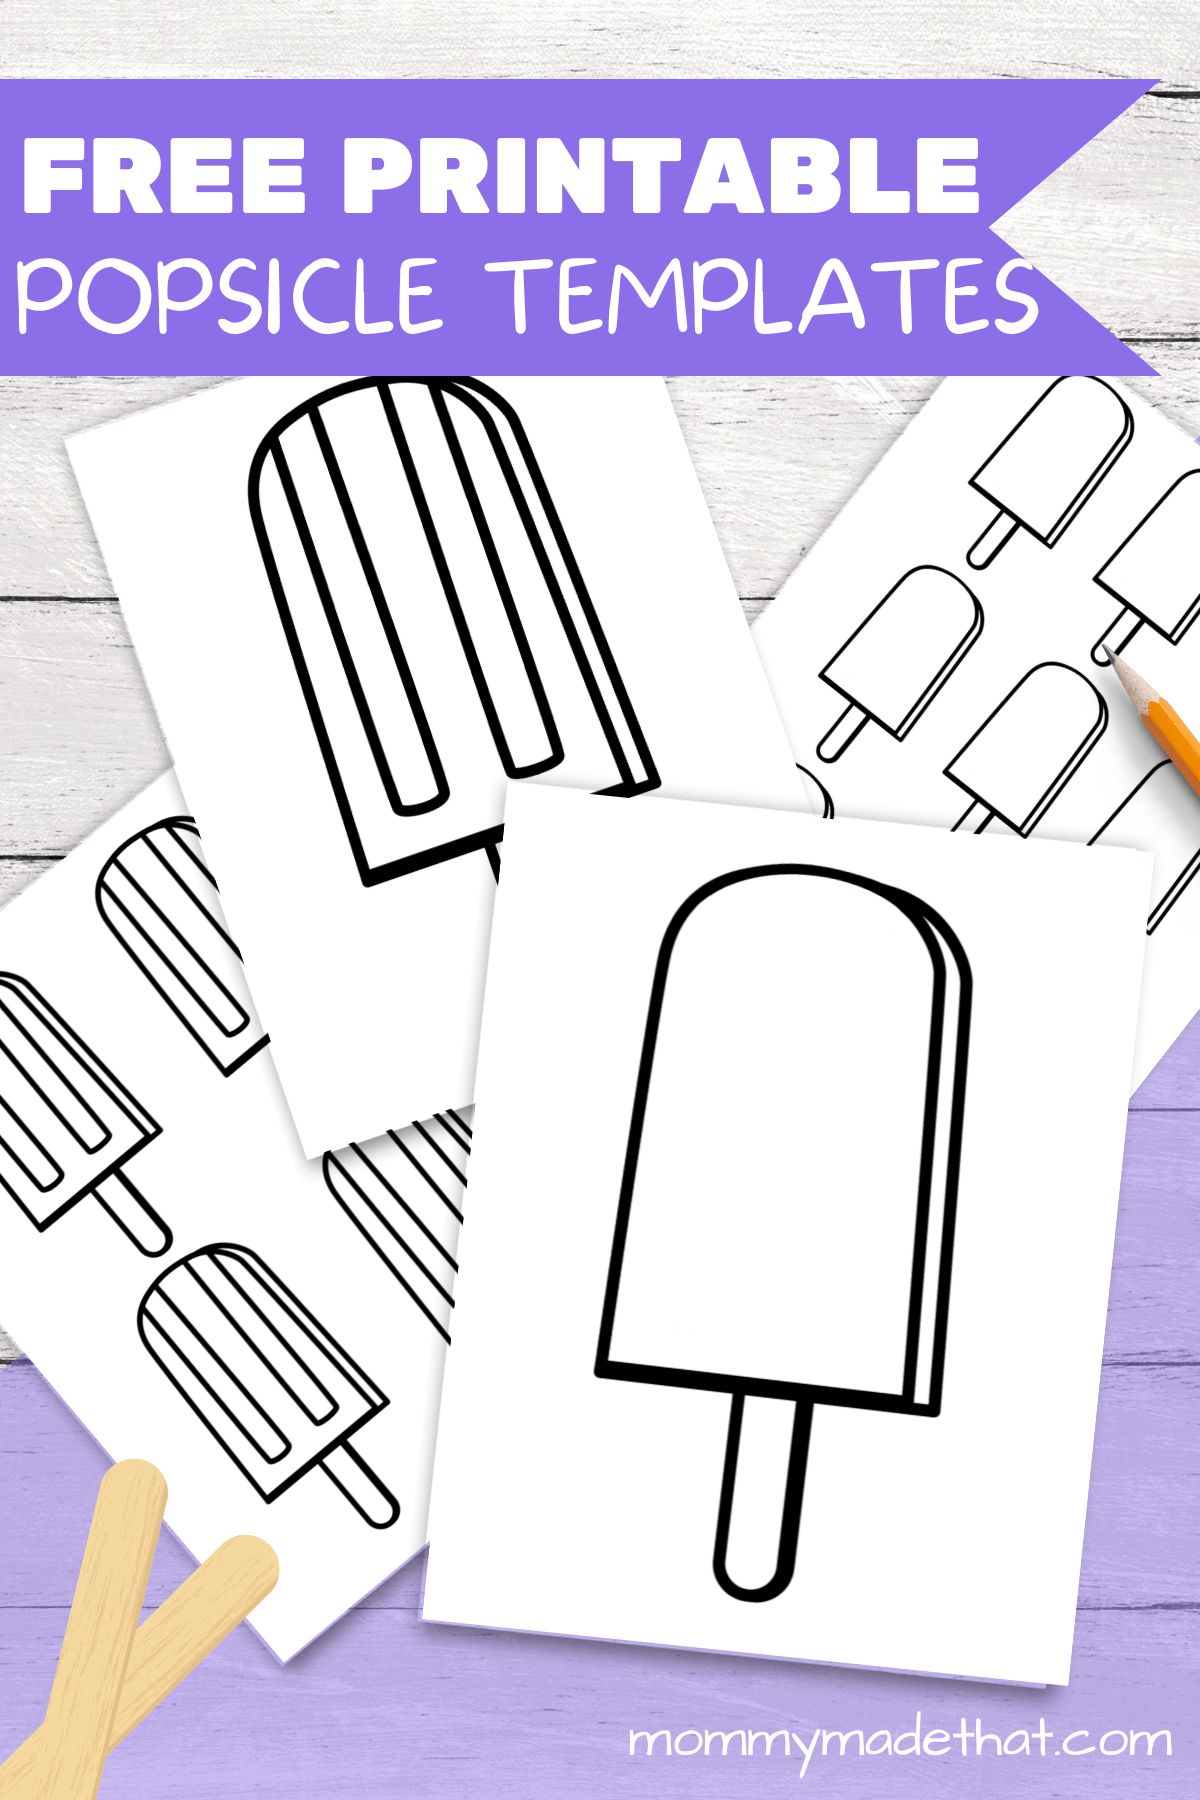 Free printable popsicle templates so many cute ones